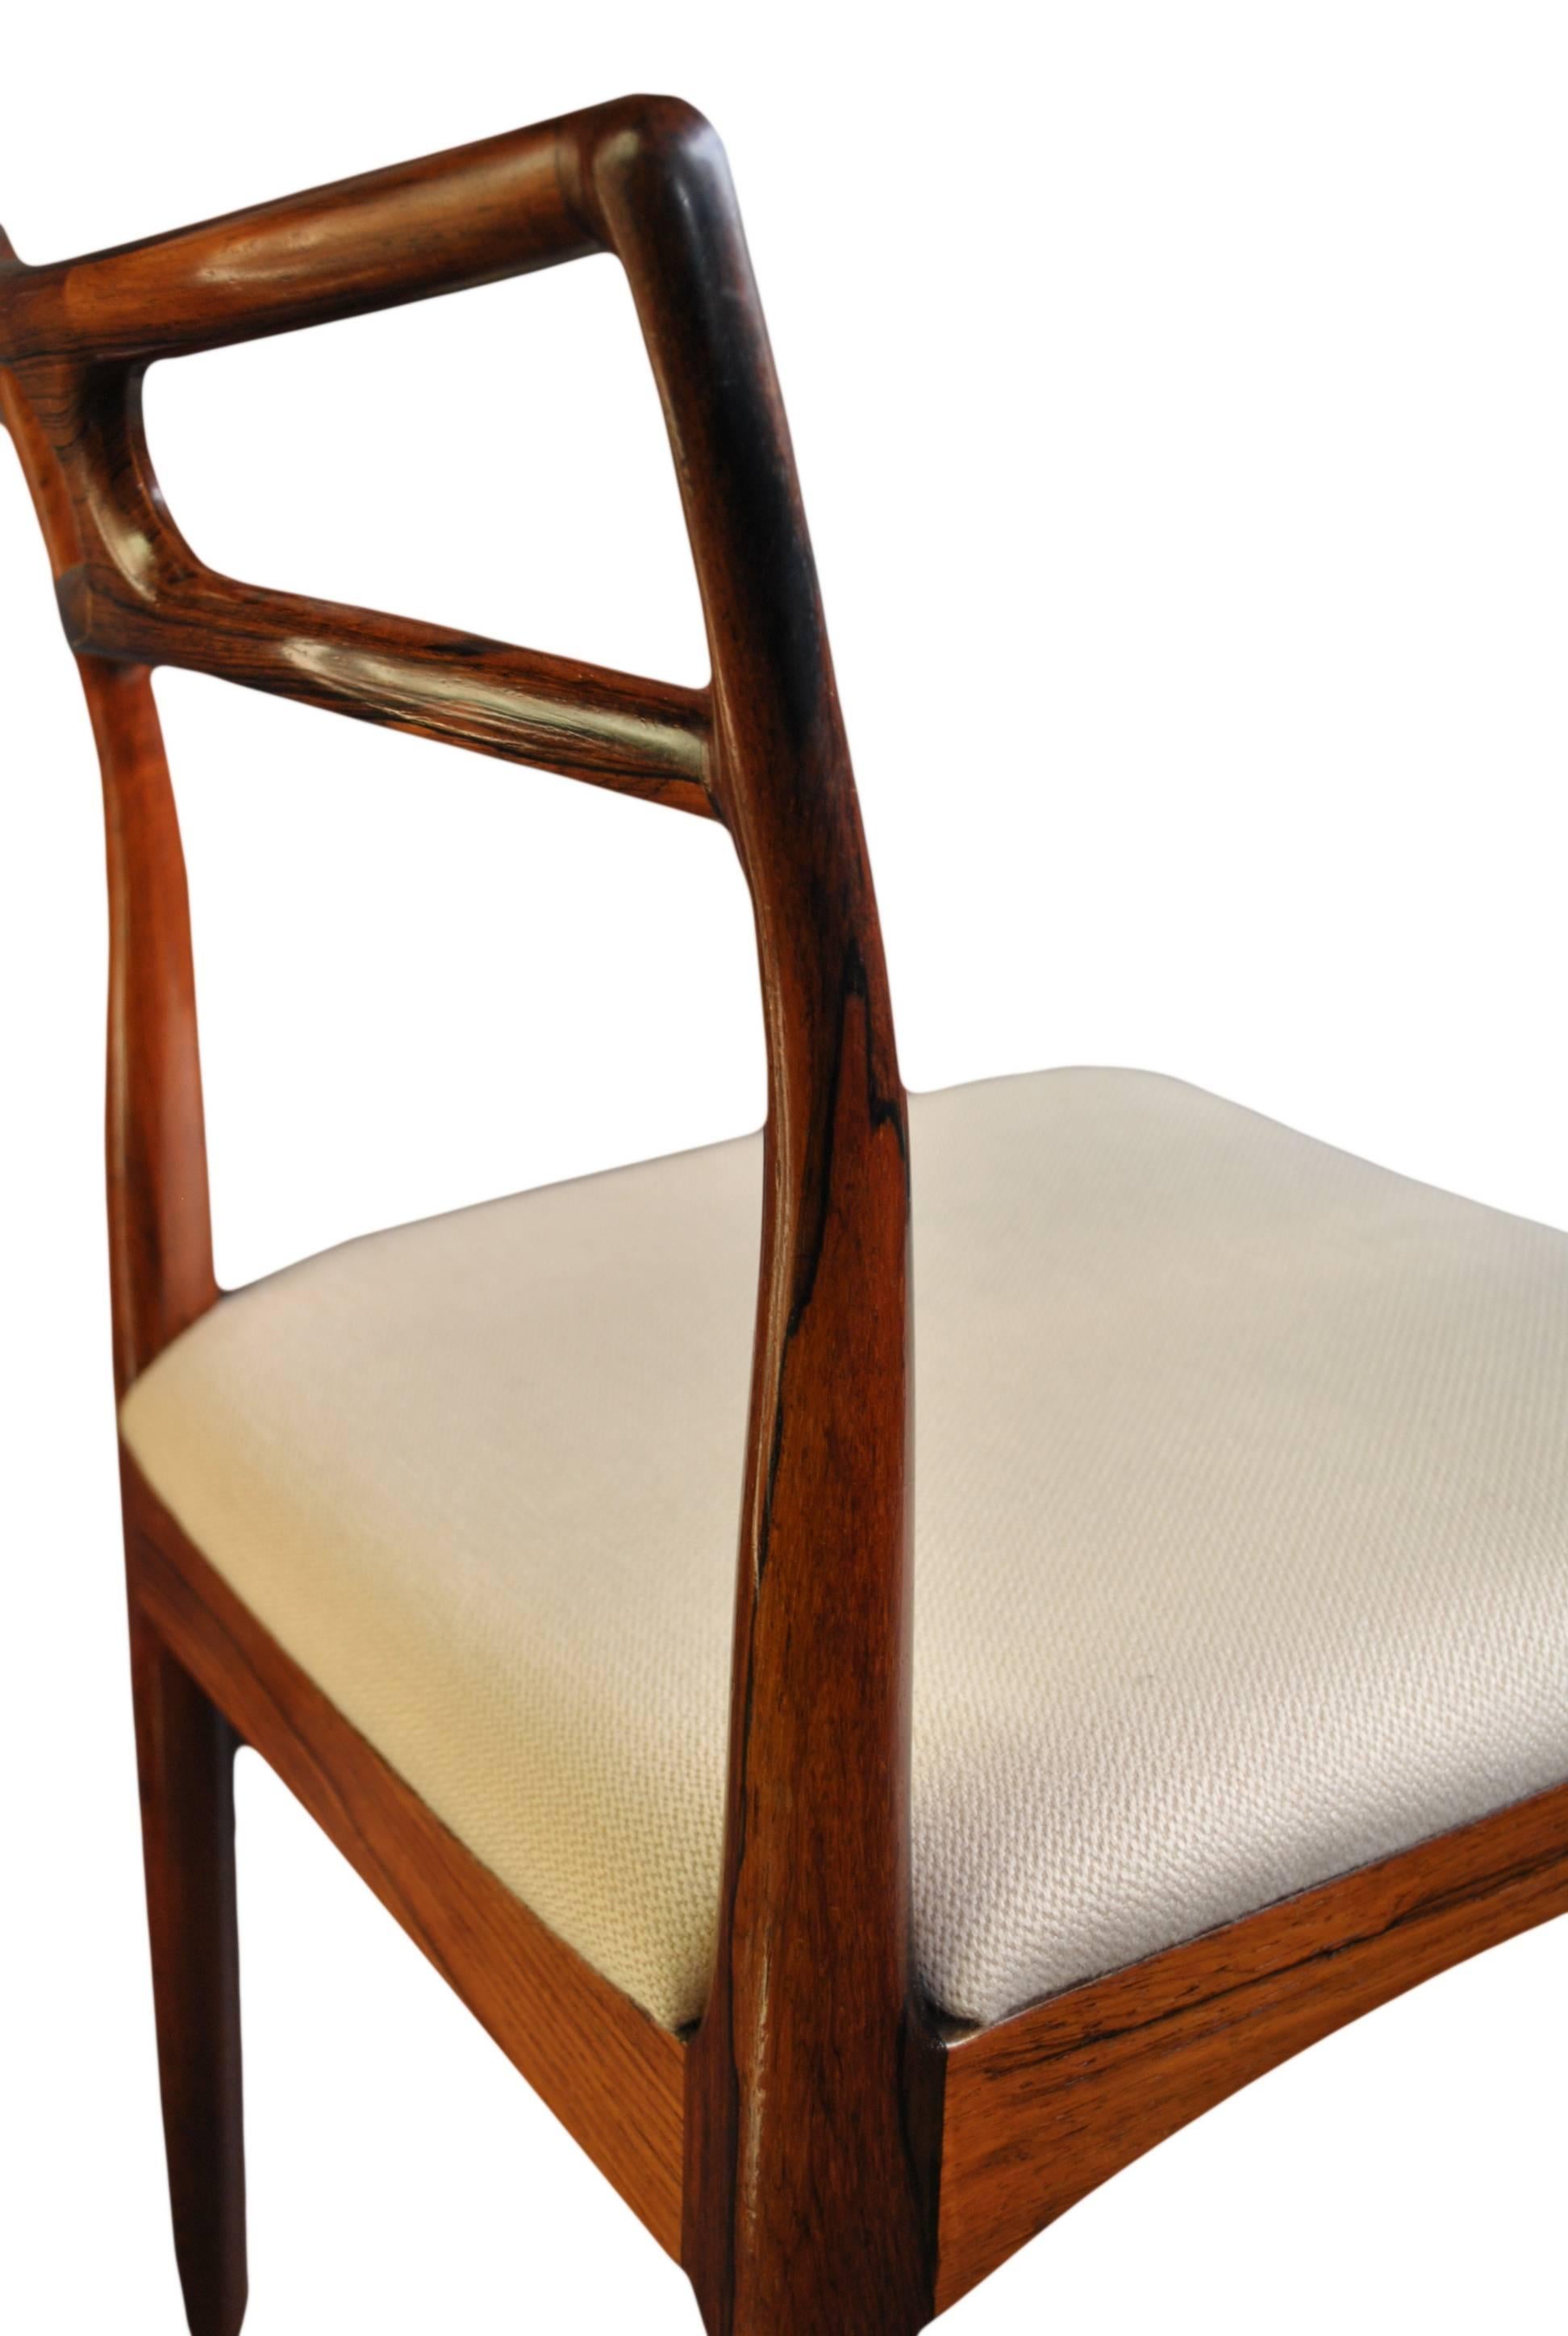 A superb set of Danish Midcentury dining chairs designed by Johannes Andersen for Christian Linneberg in the 1960s. Constructed from the finest Brazilian Rosewood and in wonderful original condition. We will reupholster the seats in any color Danish